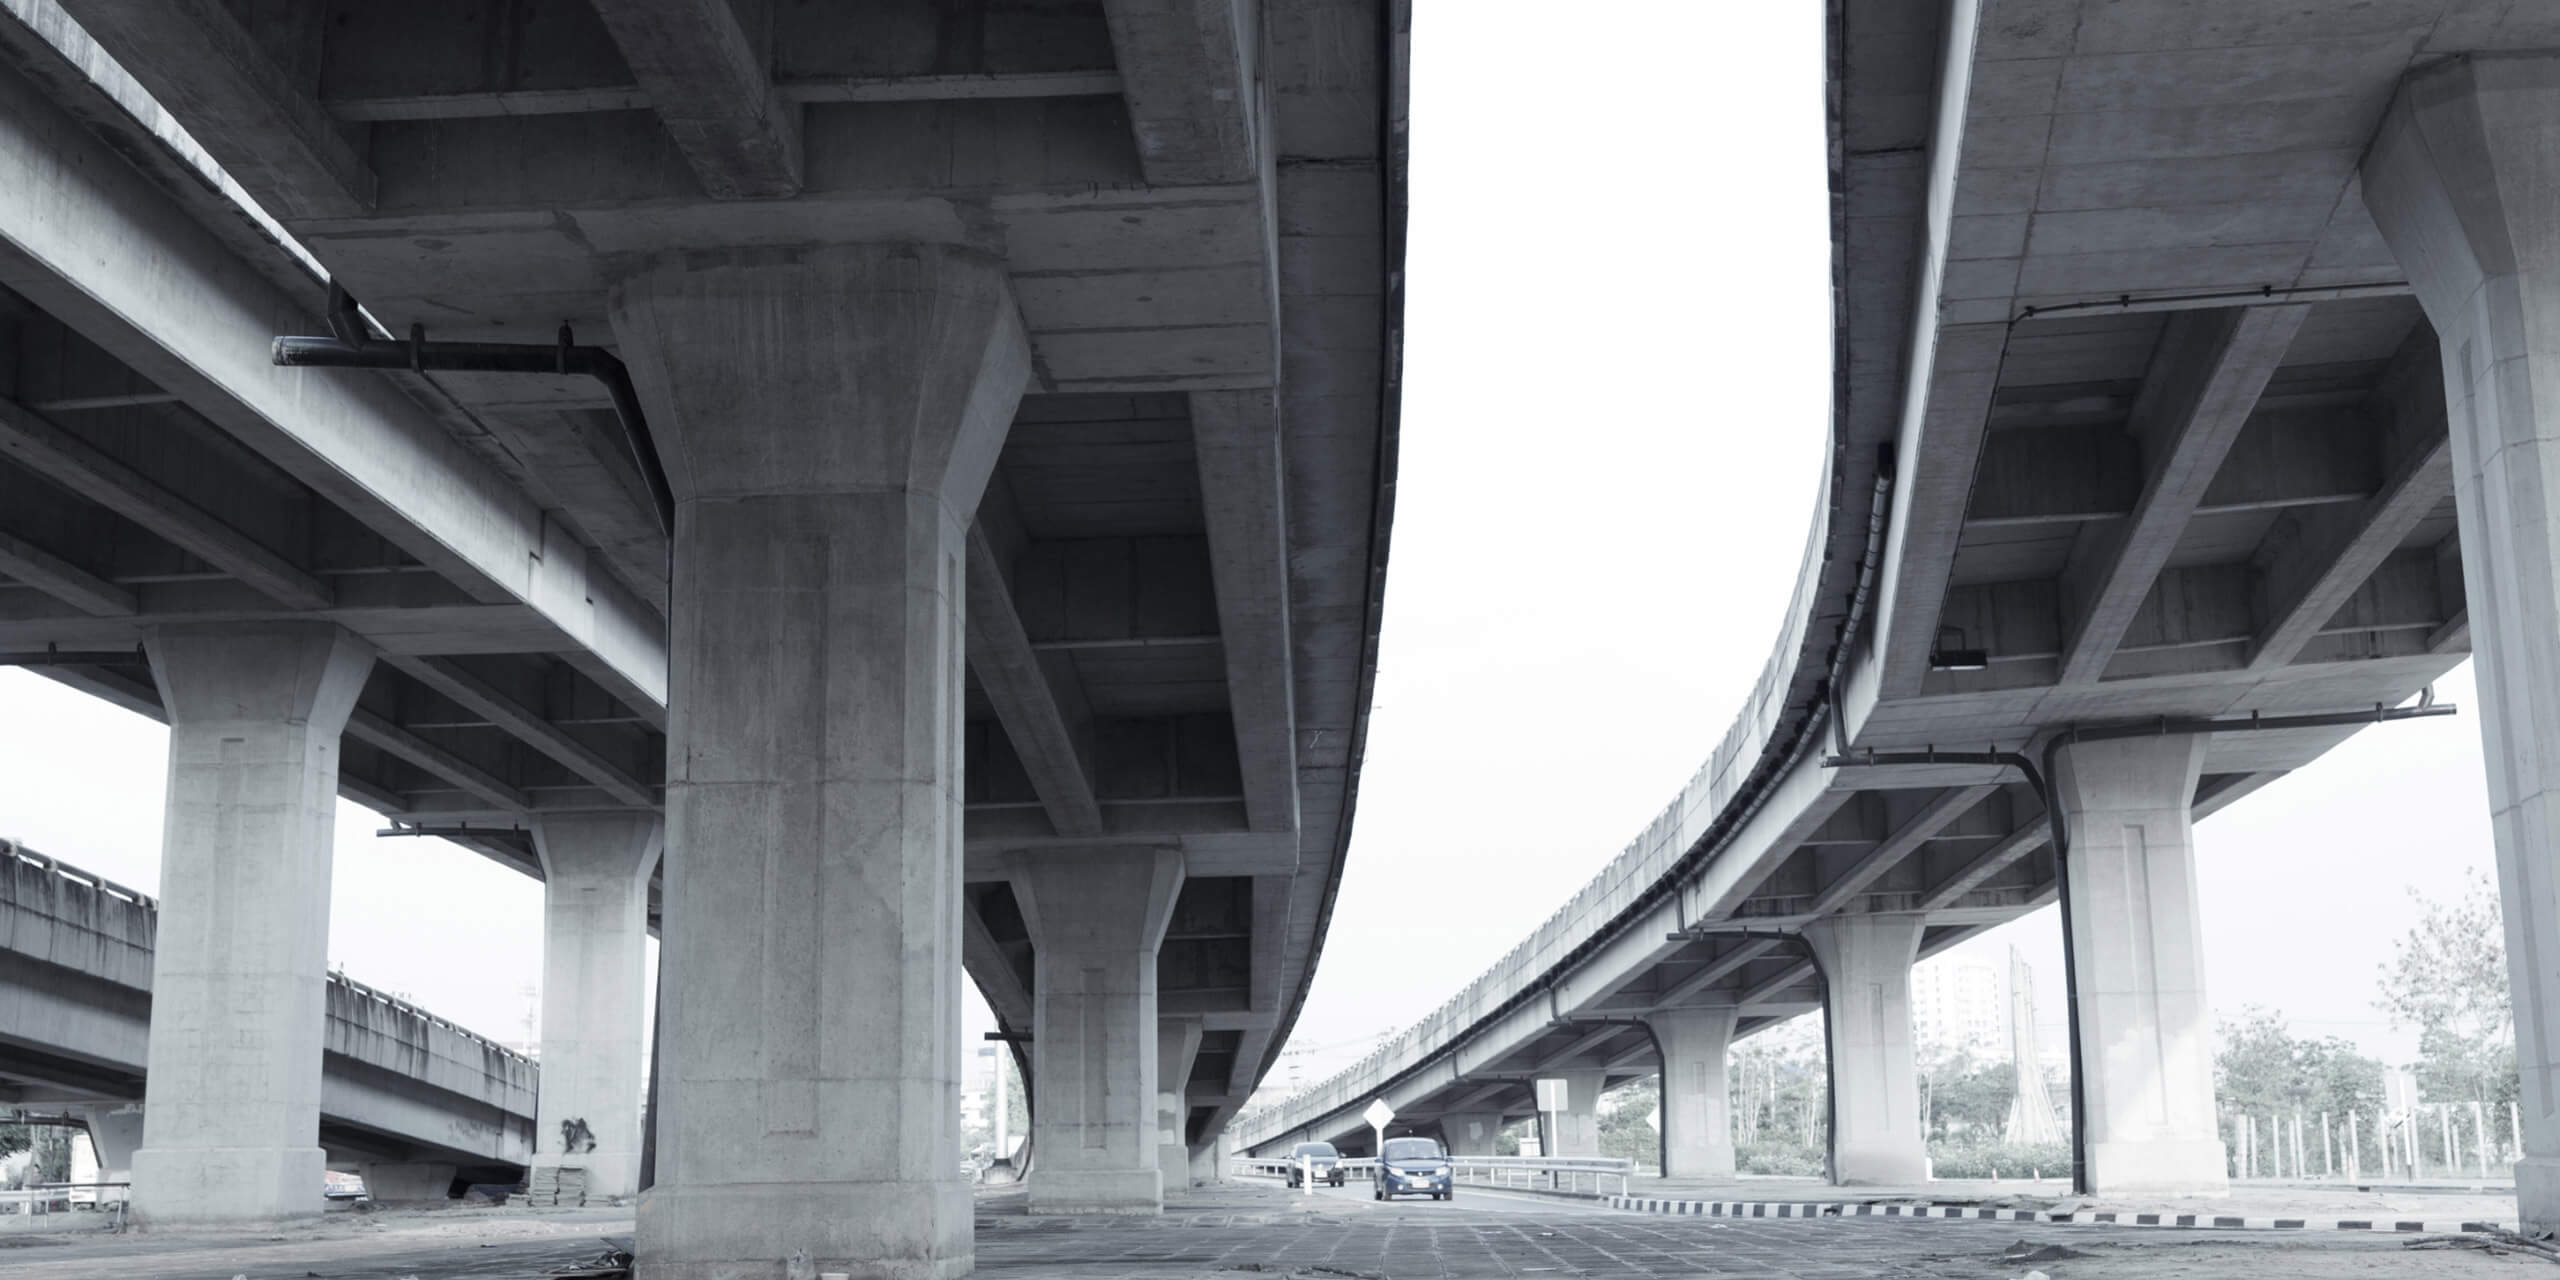 A view from under a bridge. Two cars visible in the distance. The curb on the right side is painted in black and white stripes.